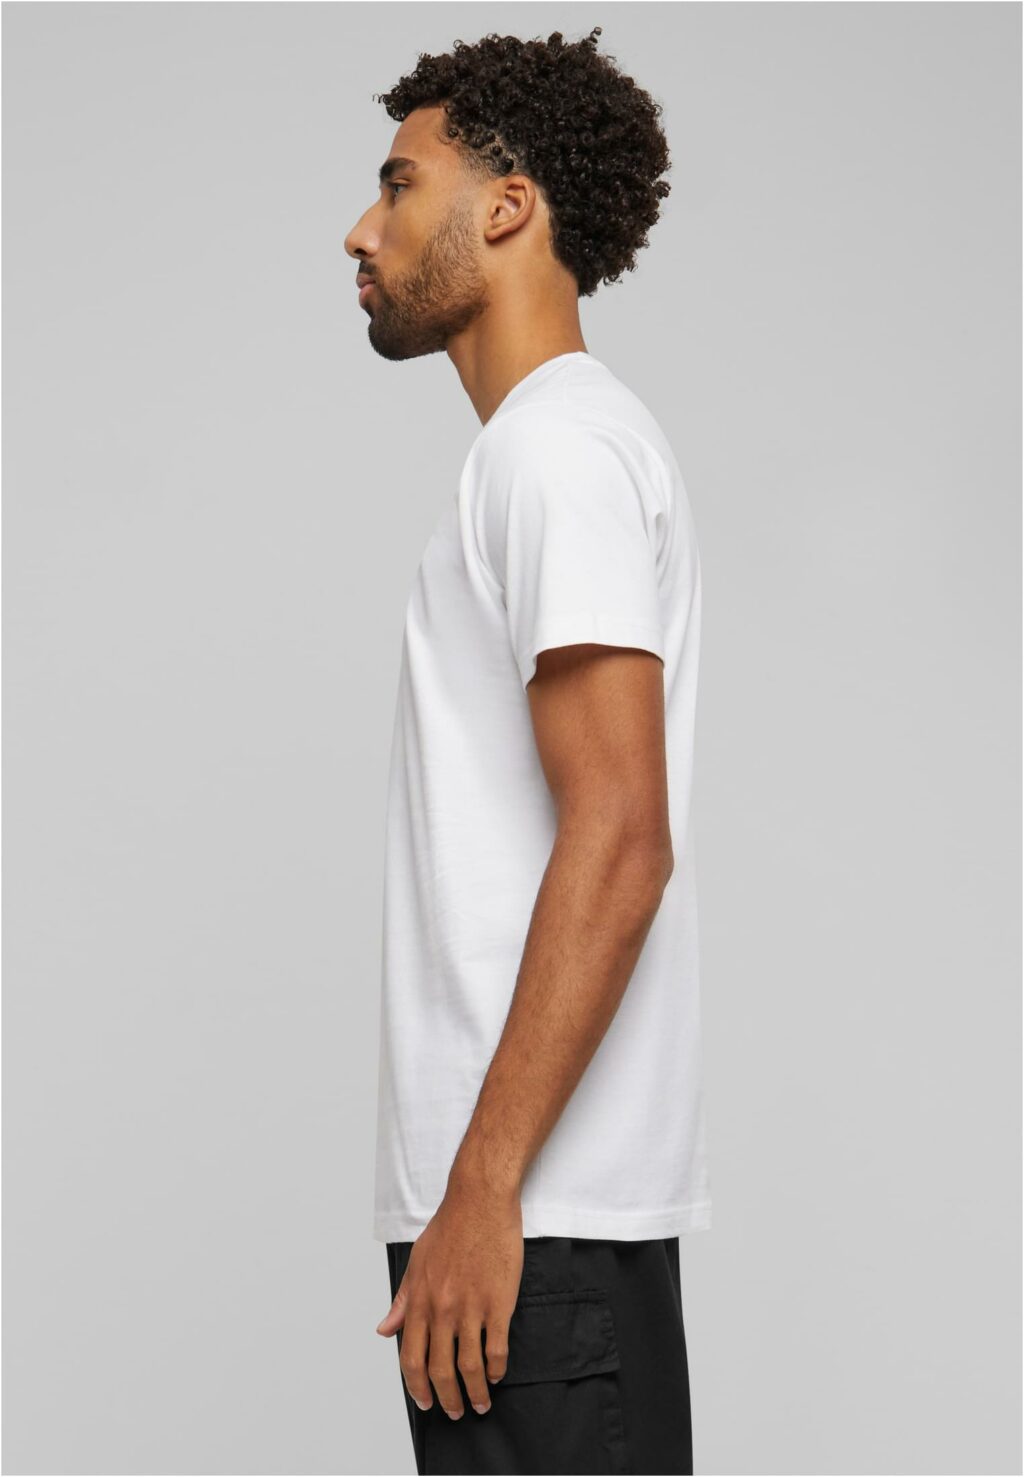 NY Patch Tee white MT2606